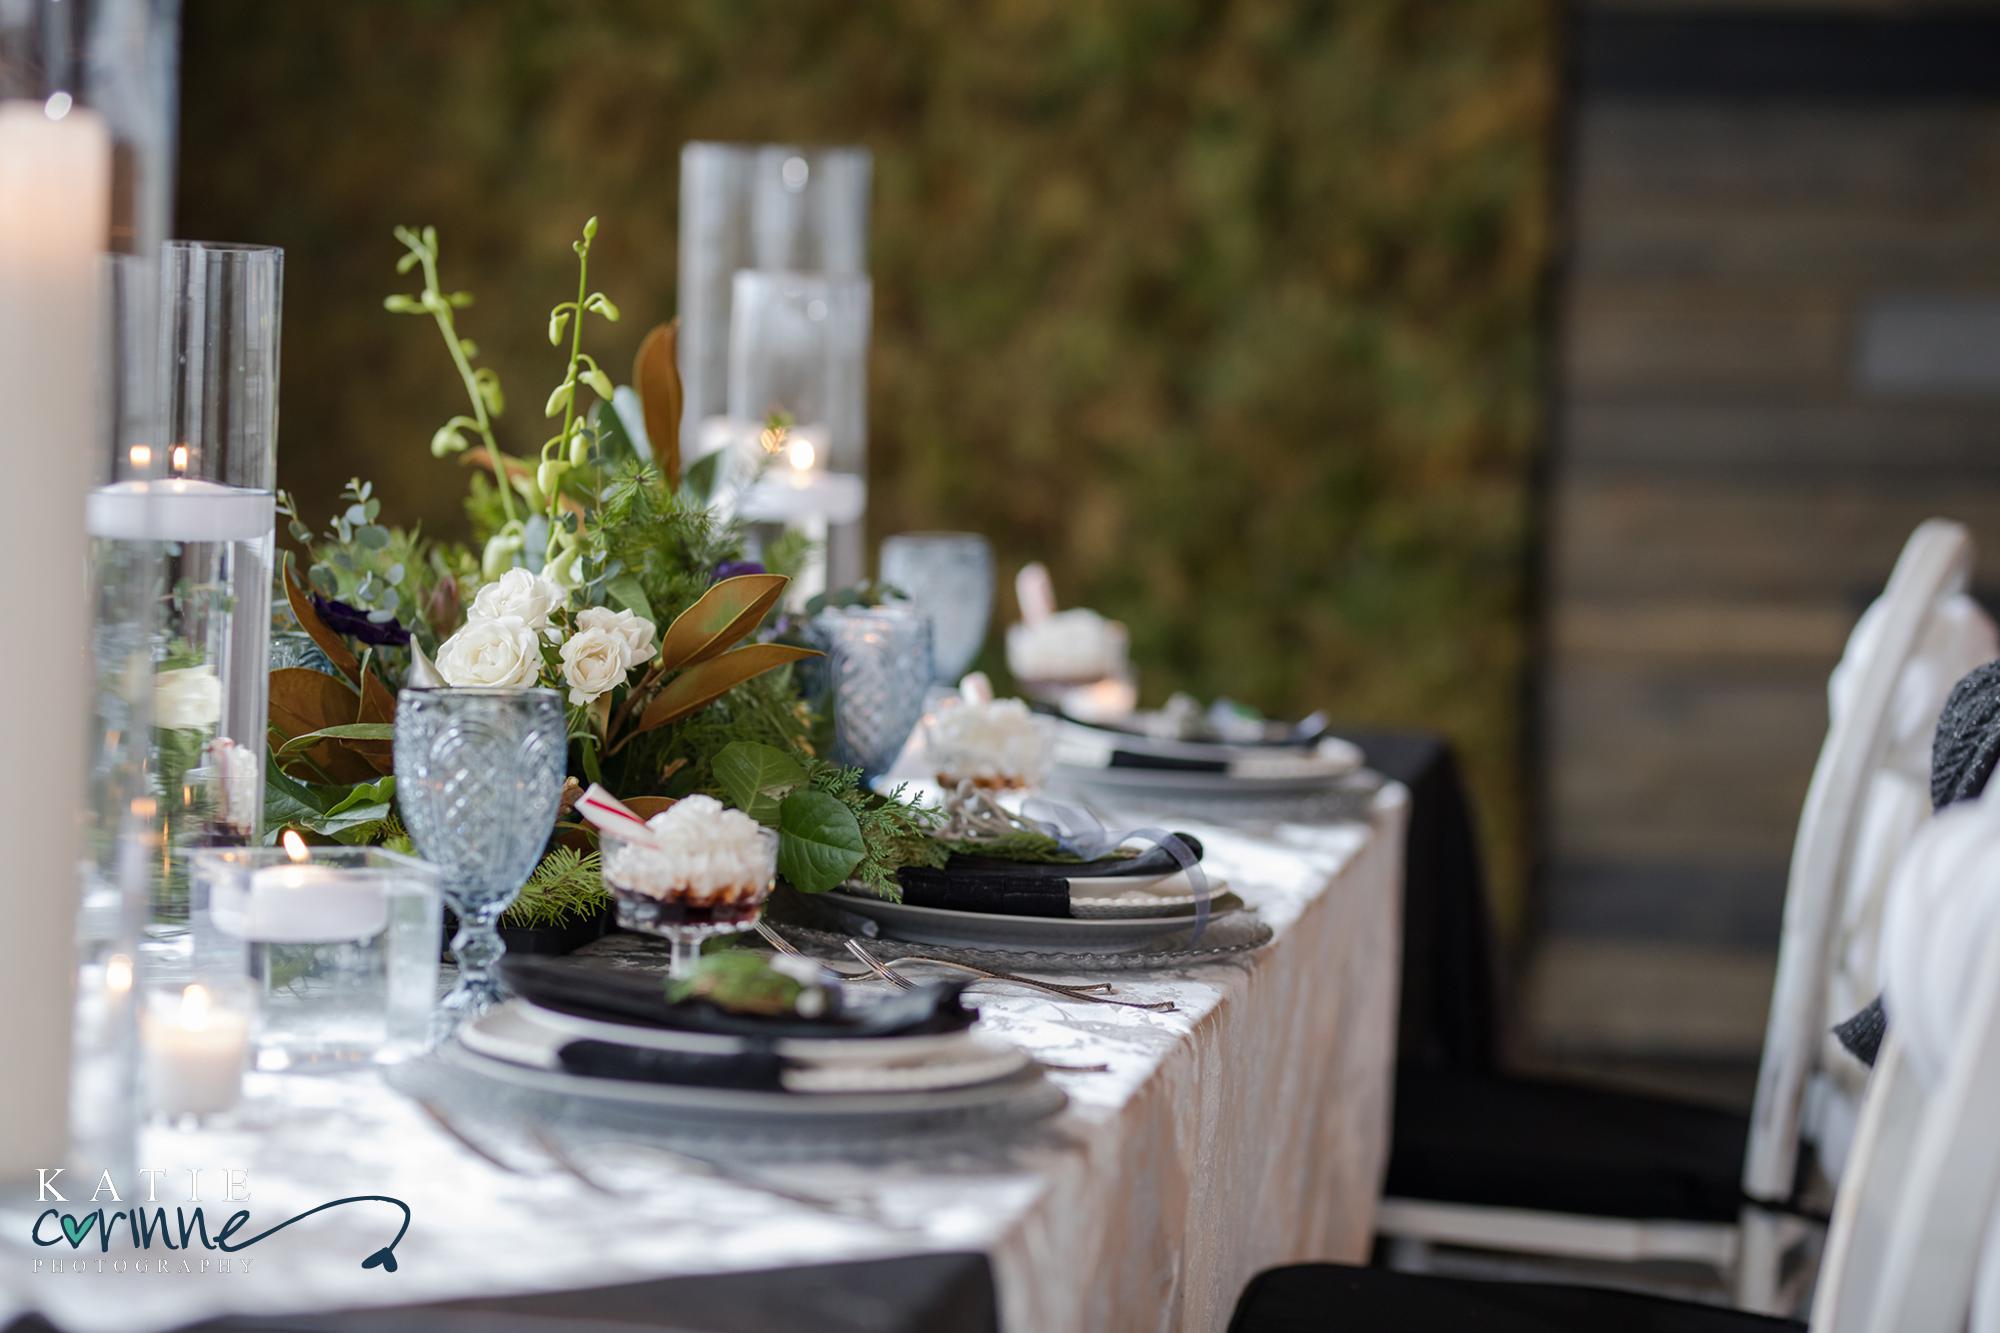 Photograph of table set up at styled wedding